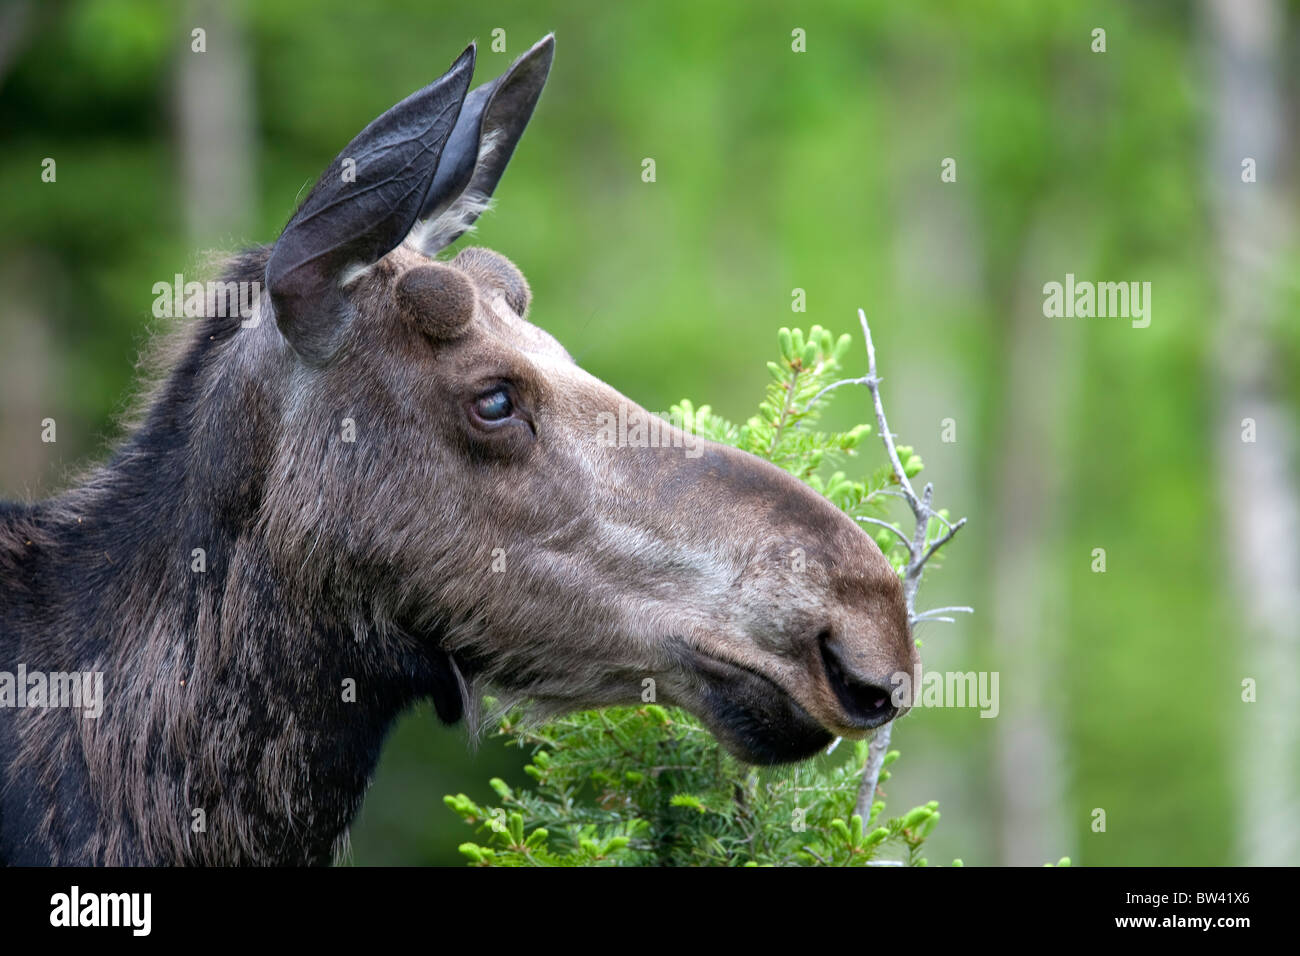 One year old bull moose with growing antlers in spring, Gaspesie National Park, Quebec, Canada Stock Photo